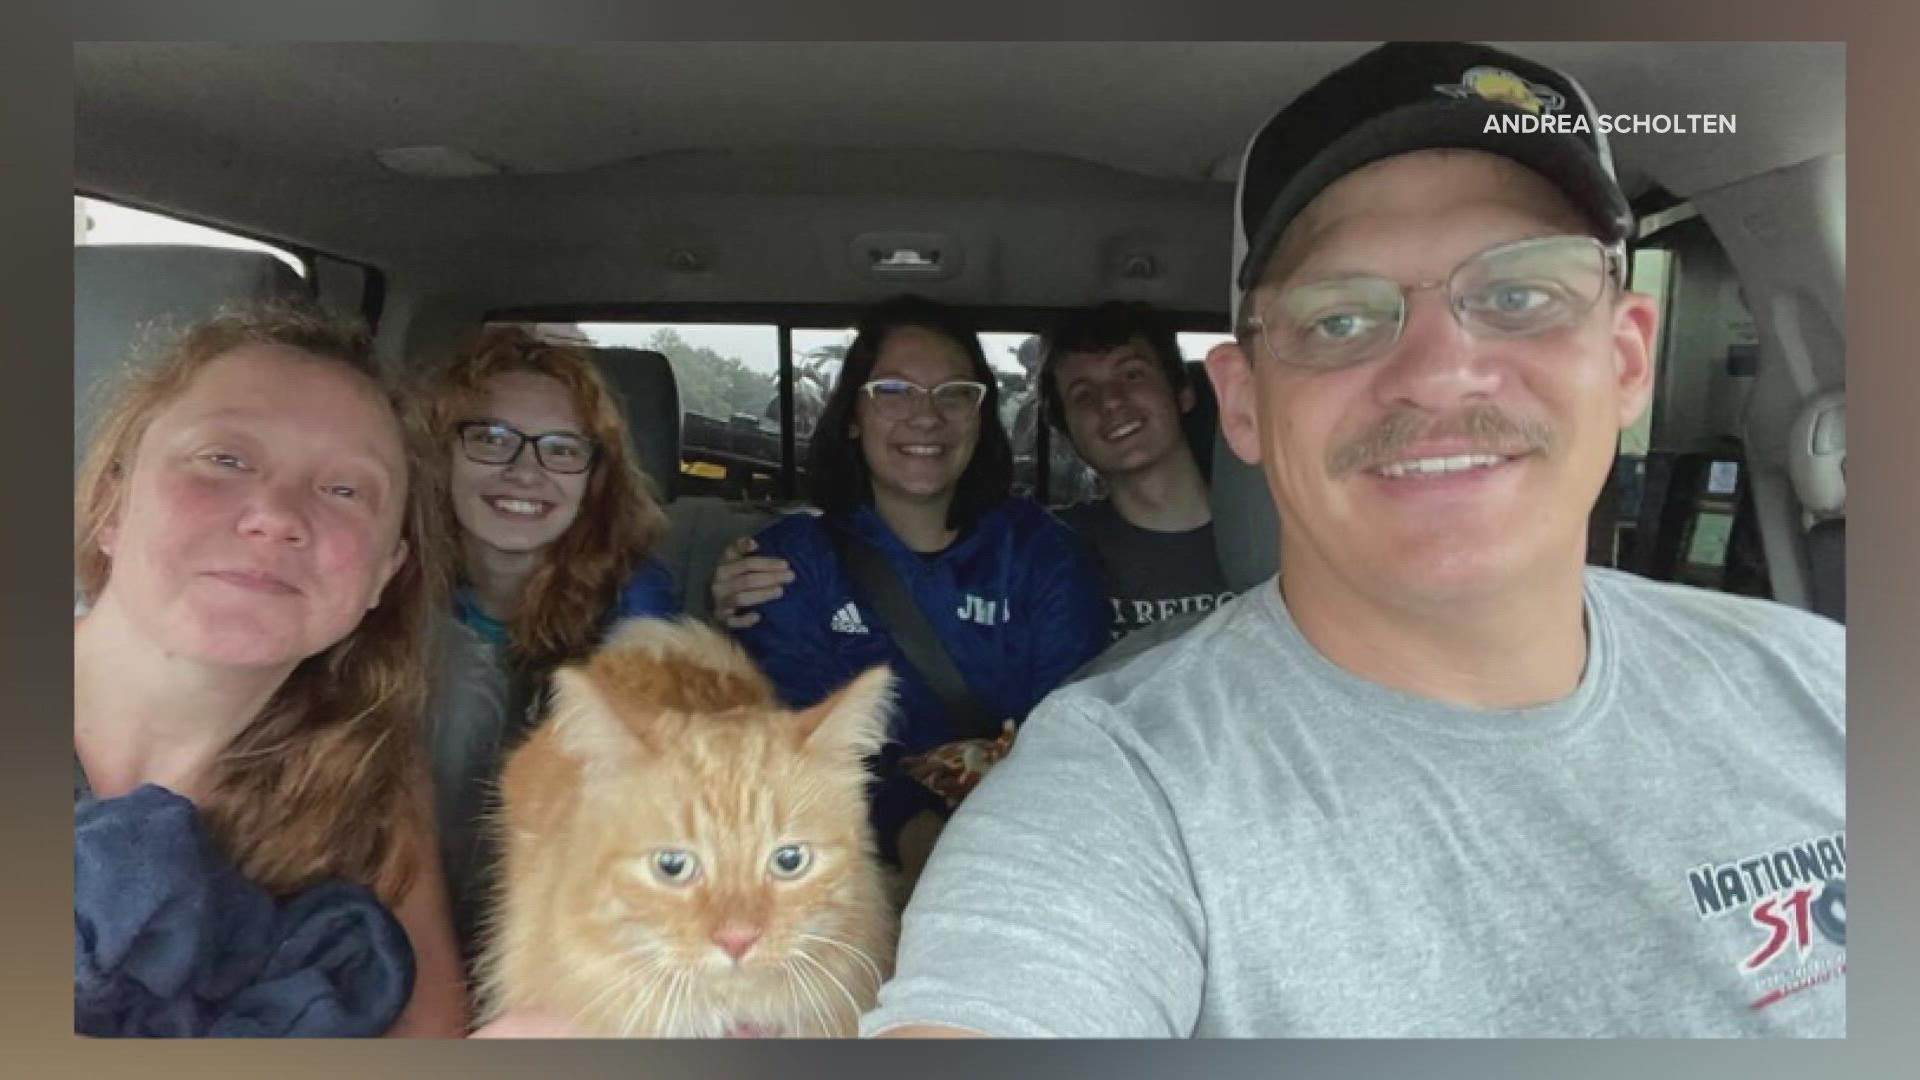 Andrea Scholten, of St. Albans, took to Facebook to share her cat's journey. Before she knew it, Delilah the stowaway quickly became an Oshkosh star.